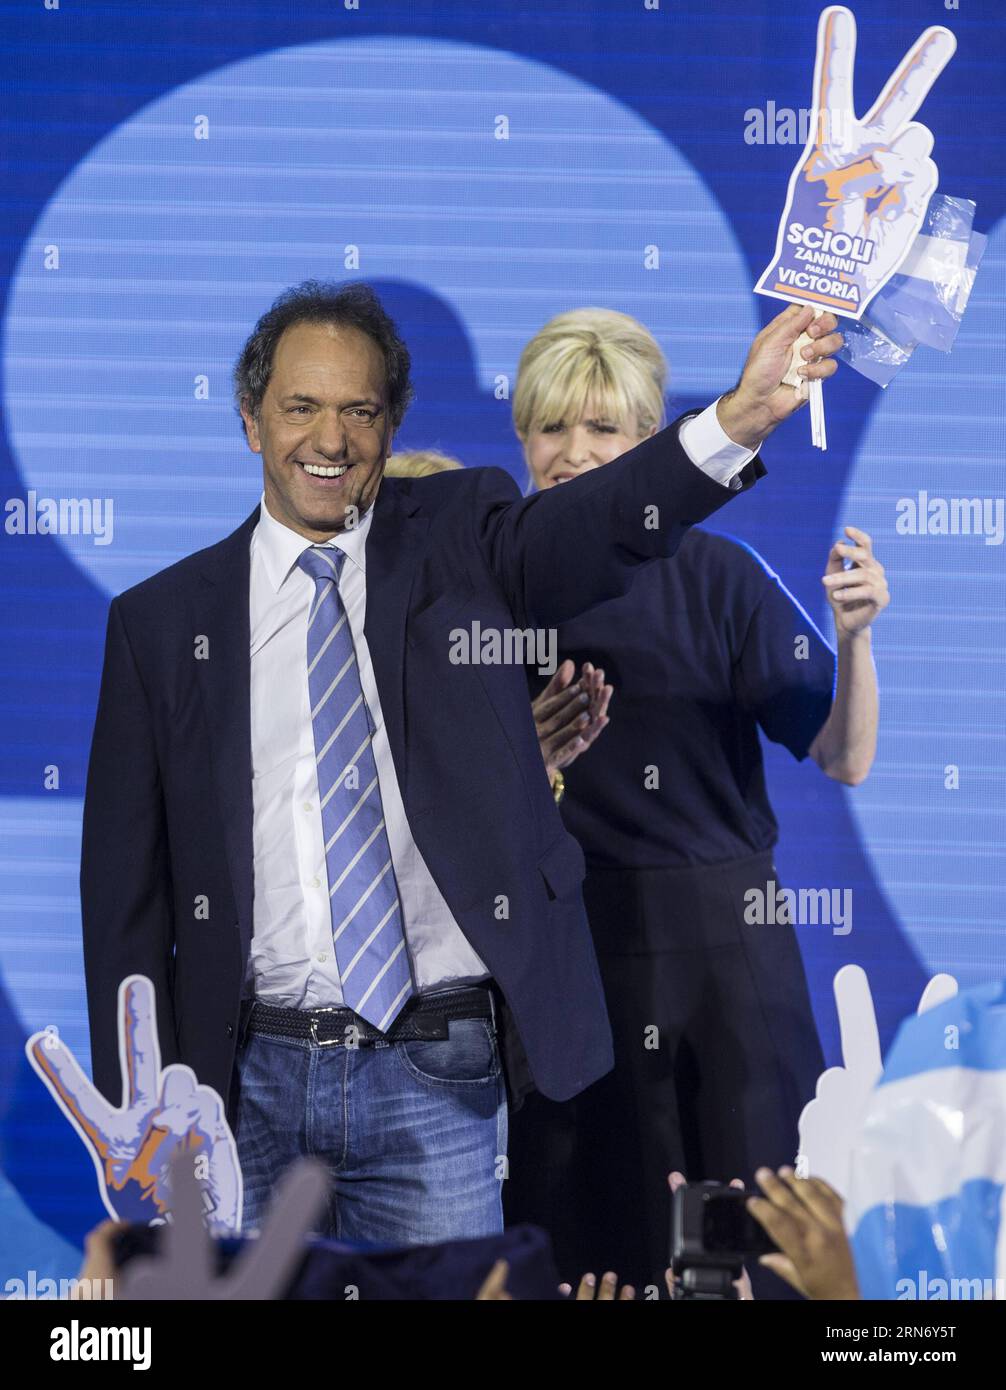 (150810) -- BUENOS AIRES, Aug. 10, 2015 -- The presidential candidate to Argentina s Presidency of ruling party Frente para la Victoria (Front for Victory), Daniel Scioli (L) and his wife Karina Rabolini (R) wave to supporters, at the campaign bunker, in Buenos Aires city, Argentina, early Aug 10, 2015. Scioli received most votes in the national primary elections in Buenos Aires on Sunday, ahead the general elections to be held on October 25th. Argentines voted Sunday in presidential primaries seen as an early indicator of who is best positioned to succeed President Cristina Kirchner. ) ARGENT Stock Photo